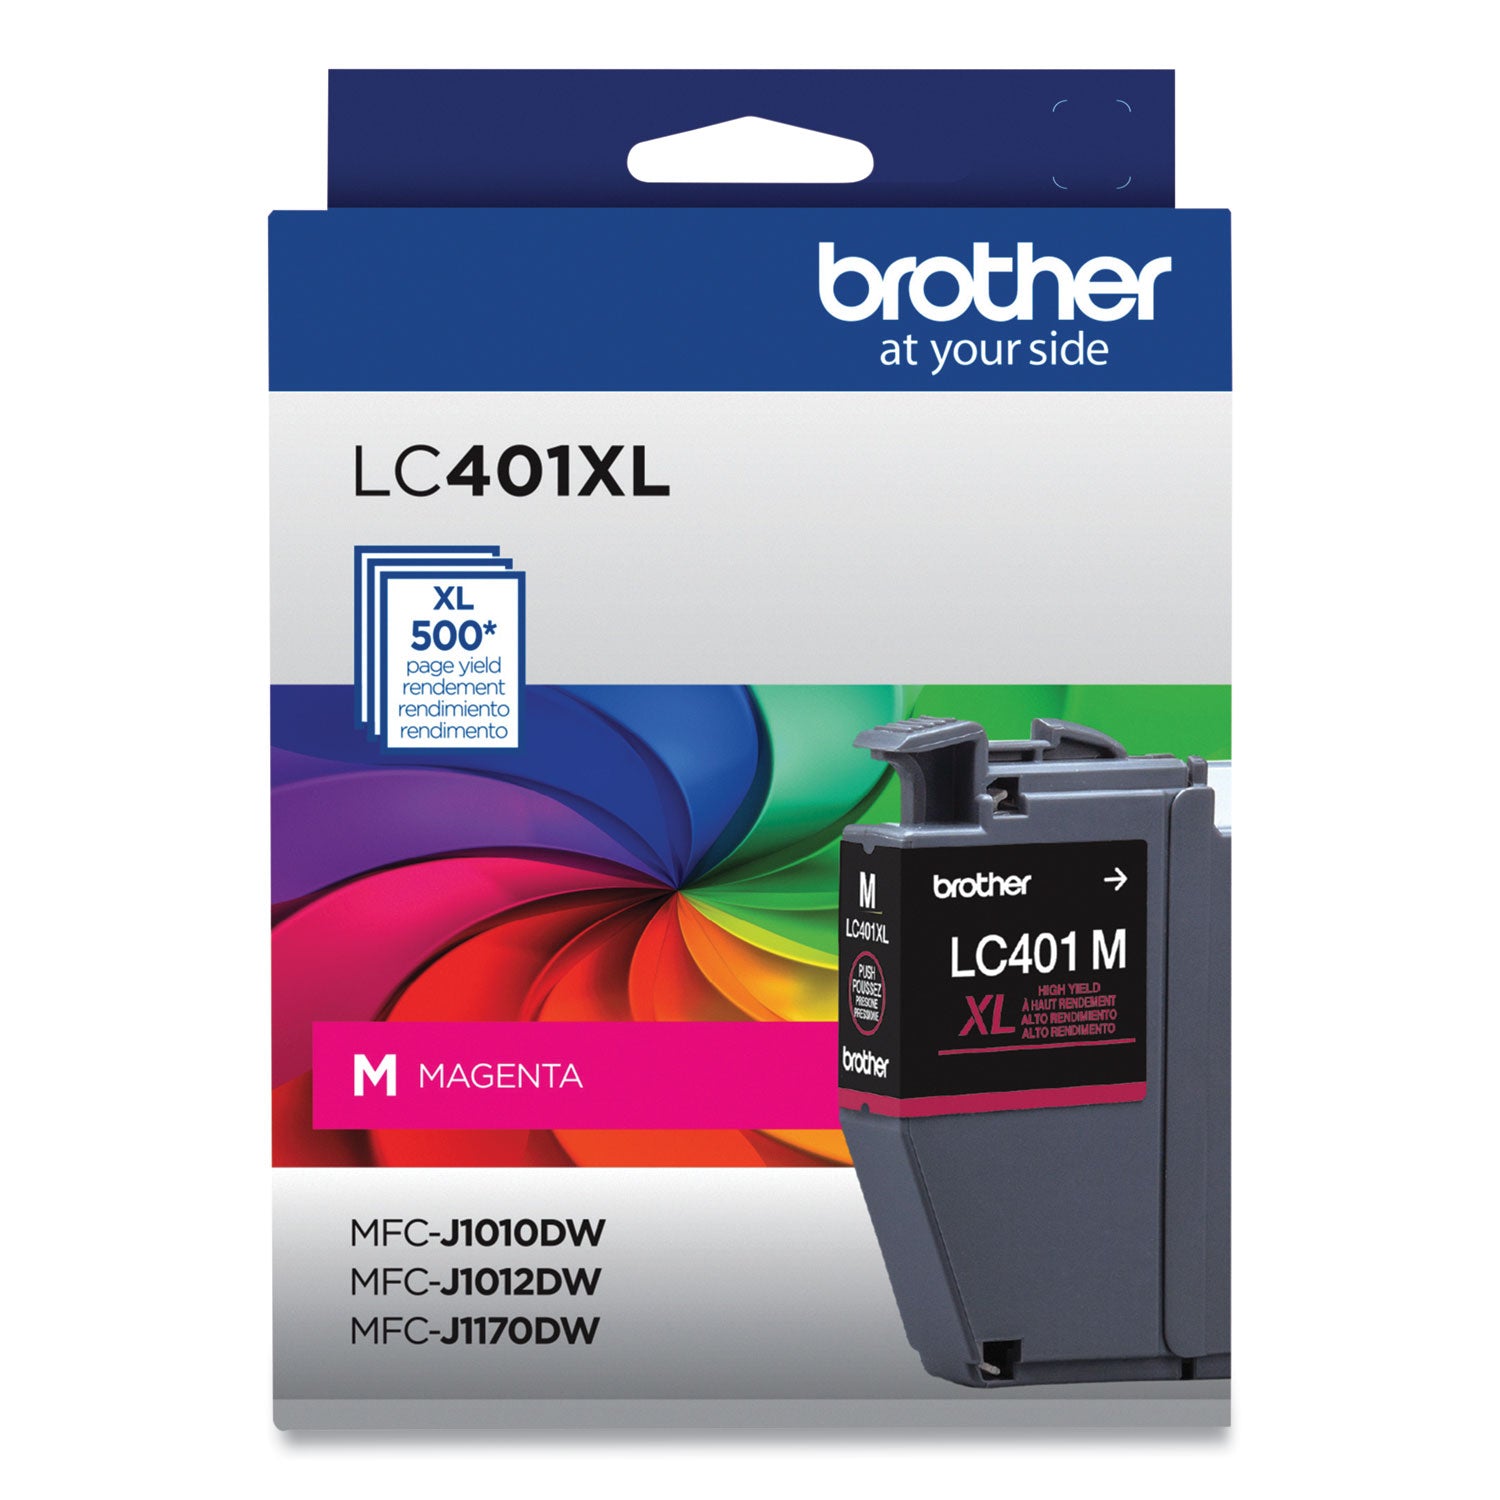 lc401xlms-high-yield-ink-500-page-yield-magenta_brtlc401xlms - 1